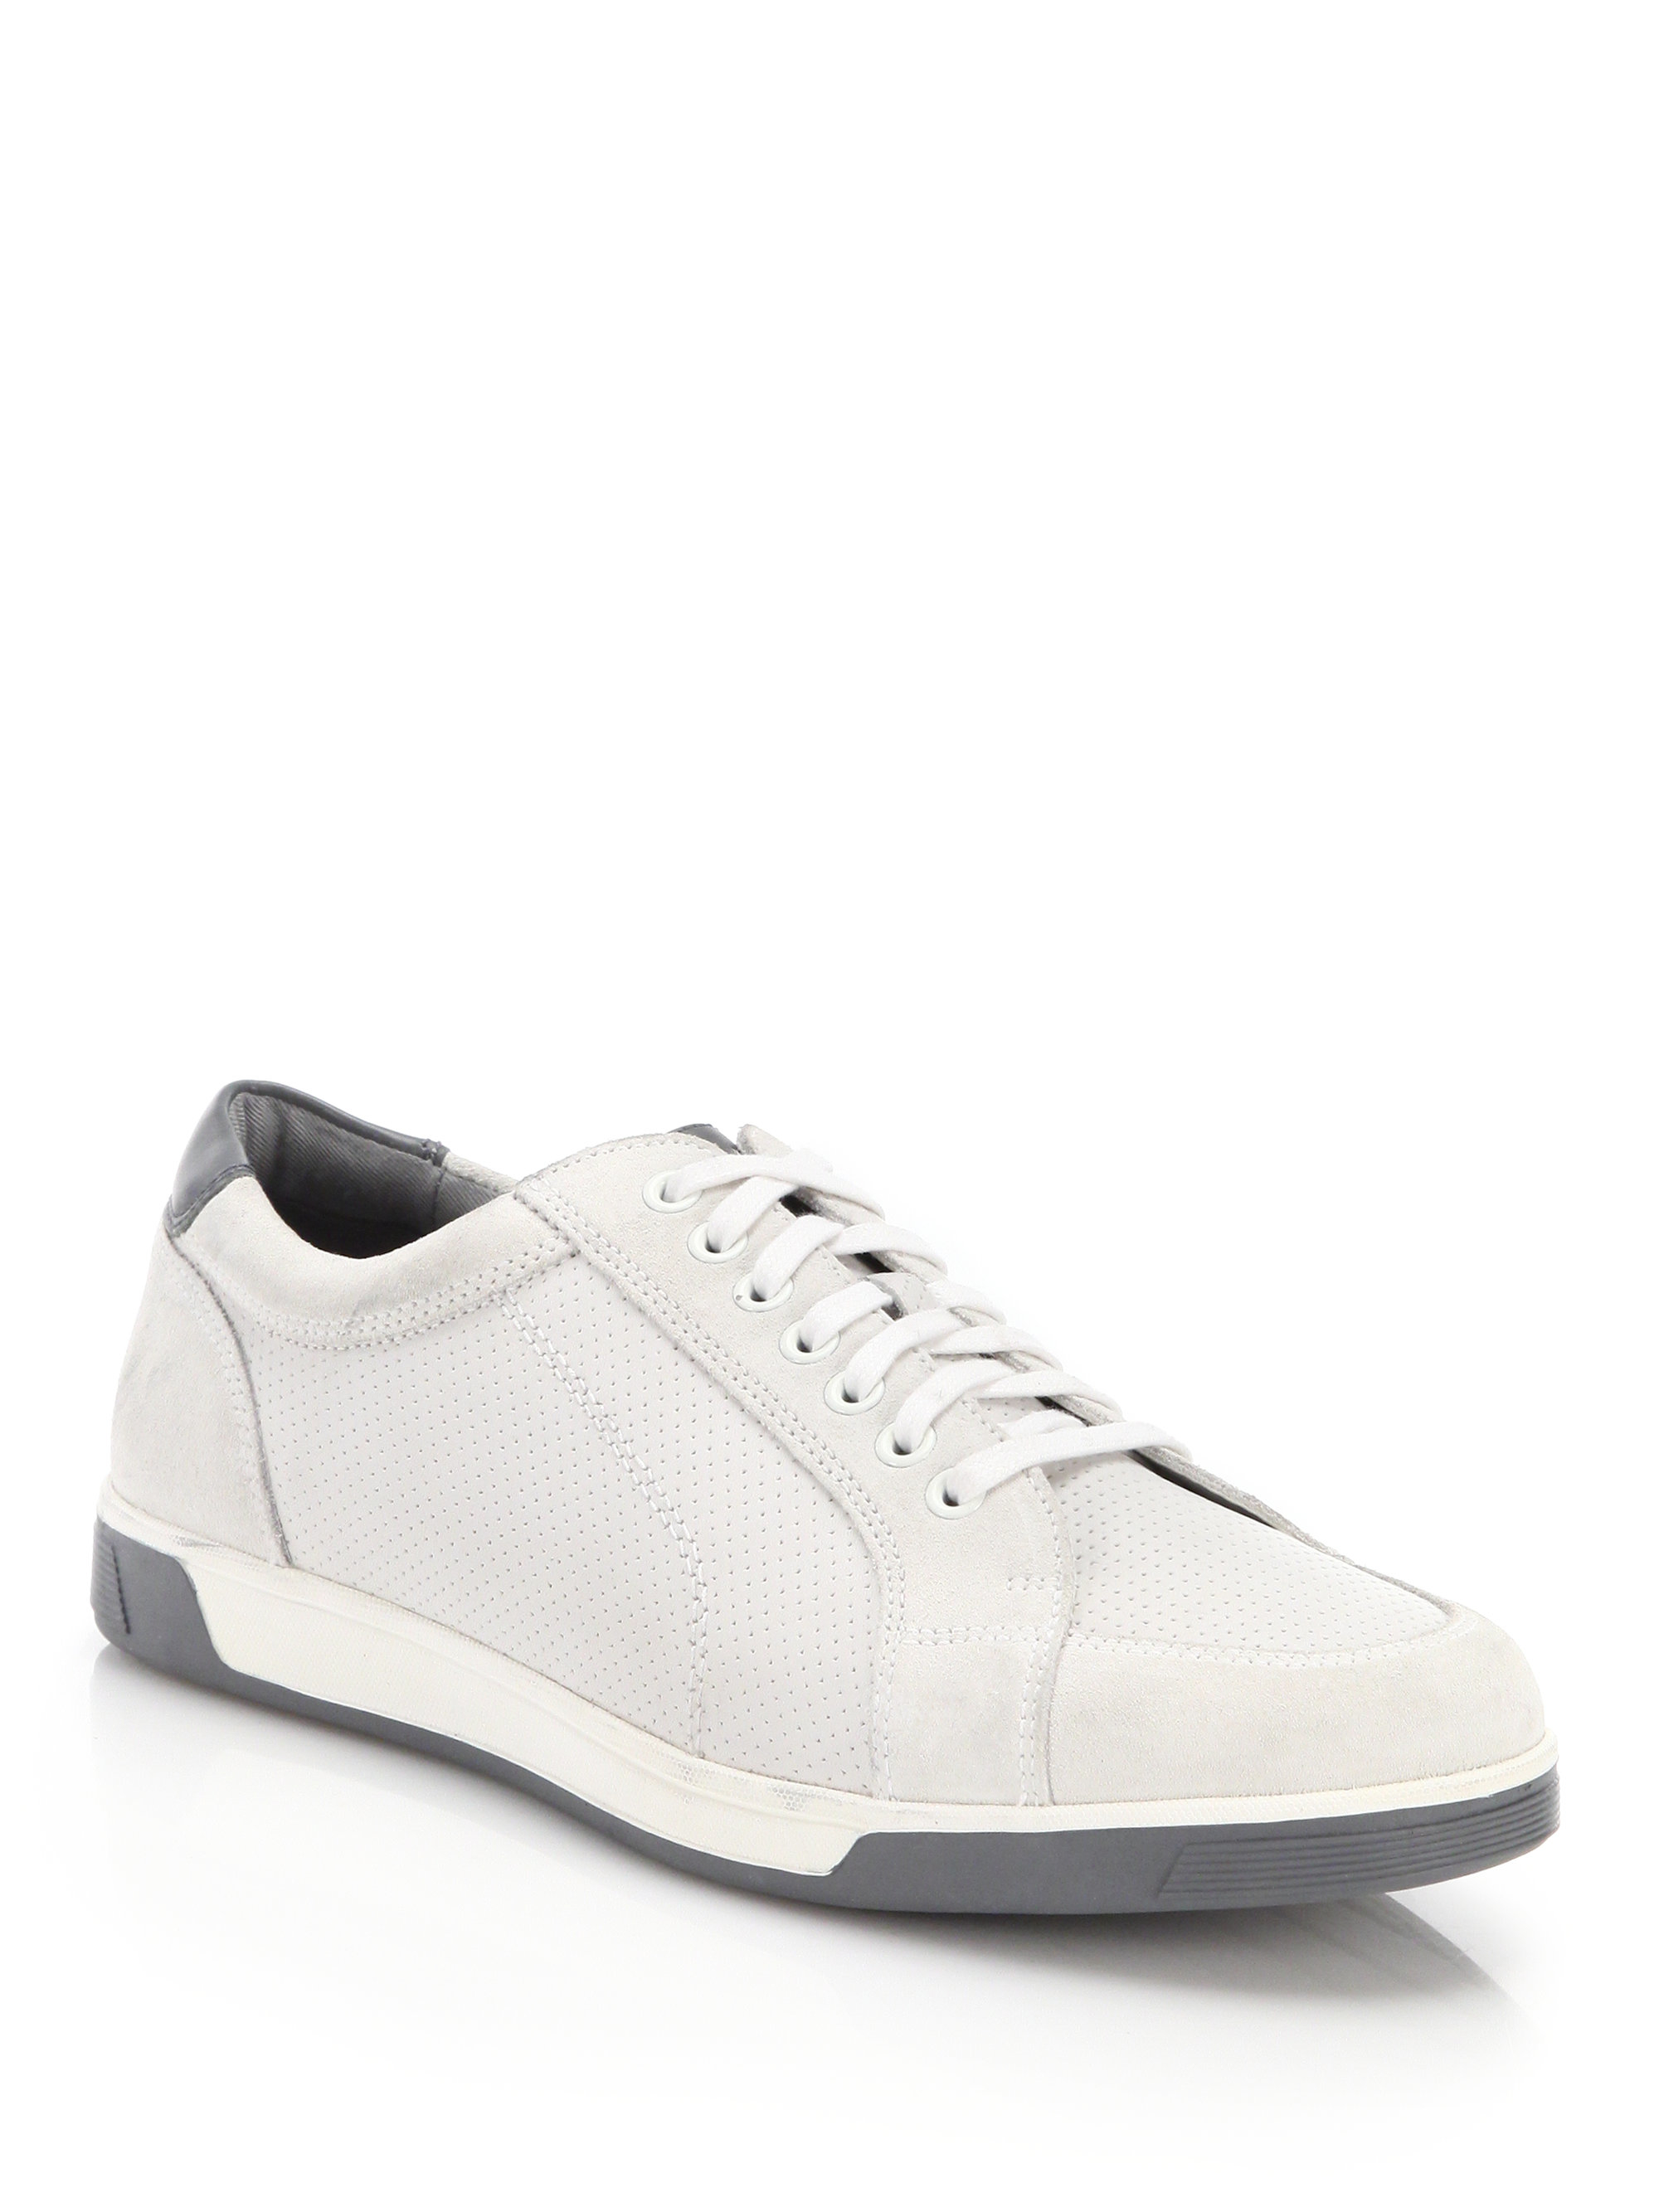 Lyst - Cole haan Vartan Sport Leather & Suede Sneakers in White for Men